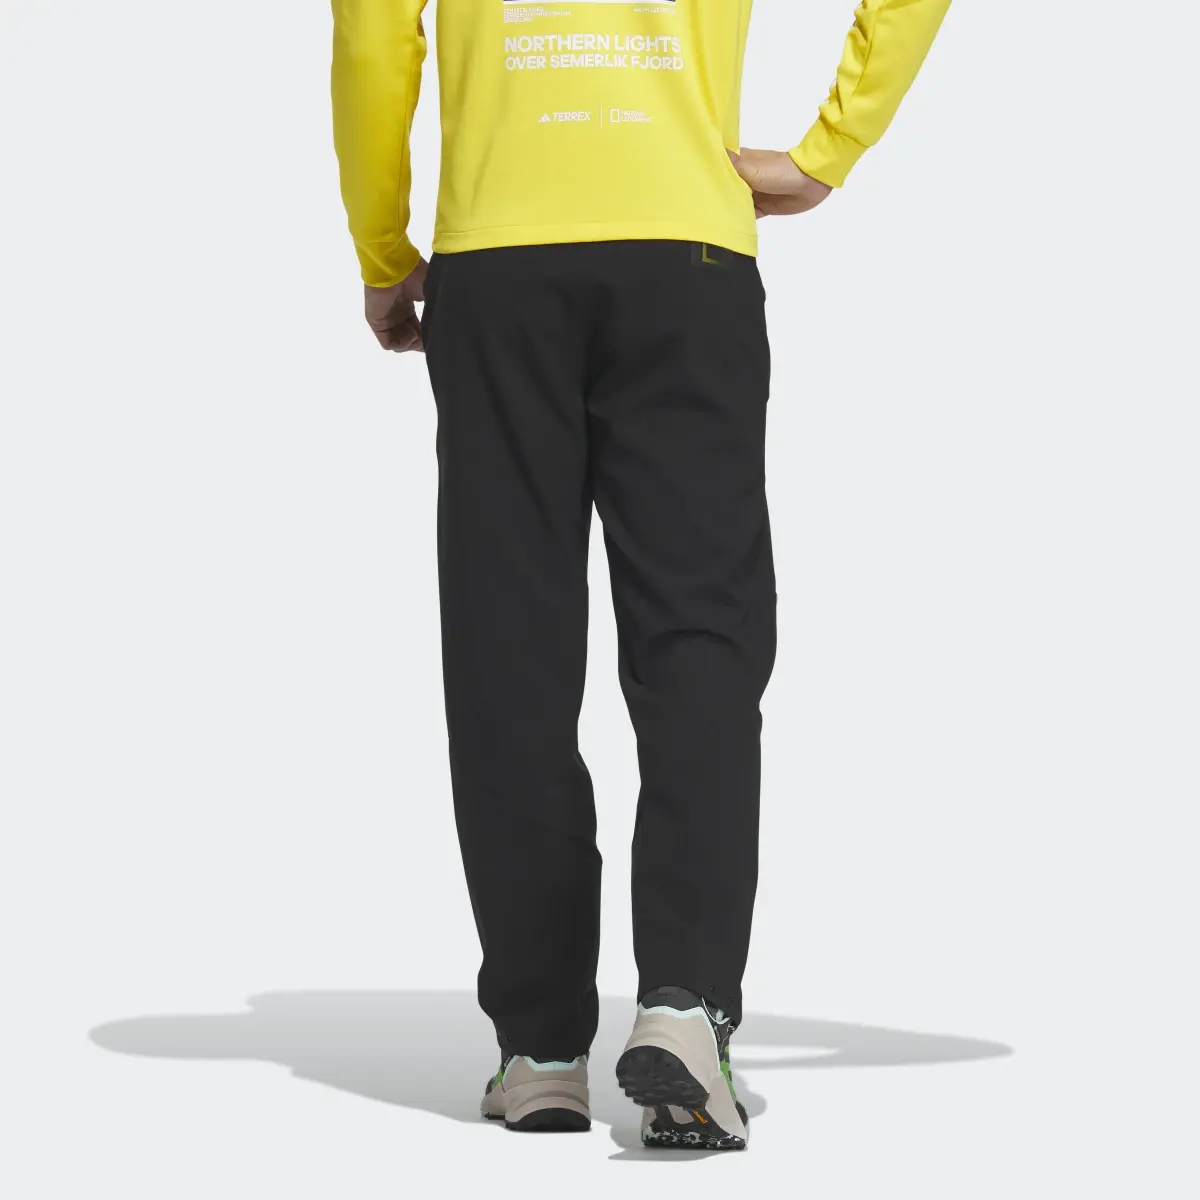 Adidas Pants National Geographic Soft Shell. 2